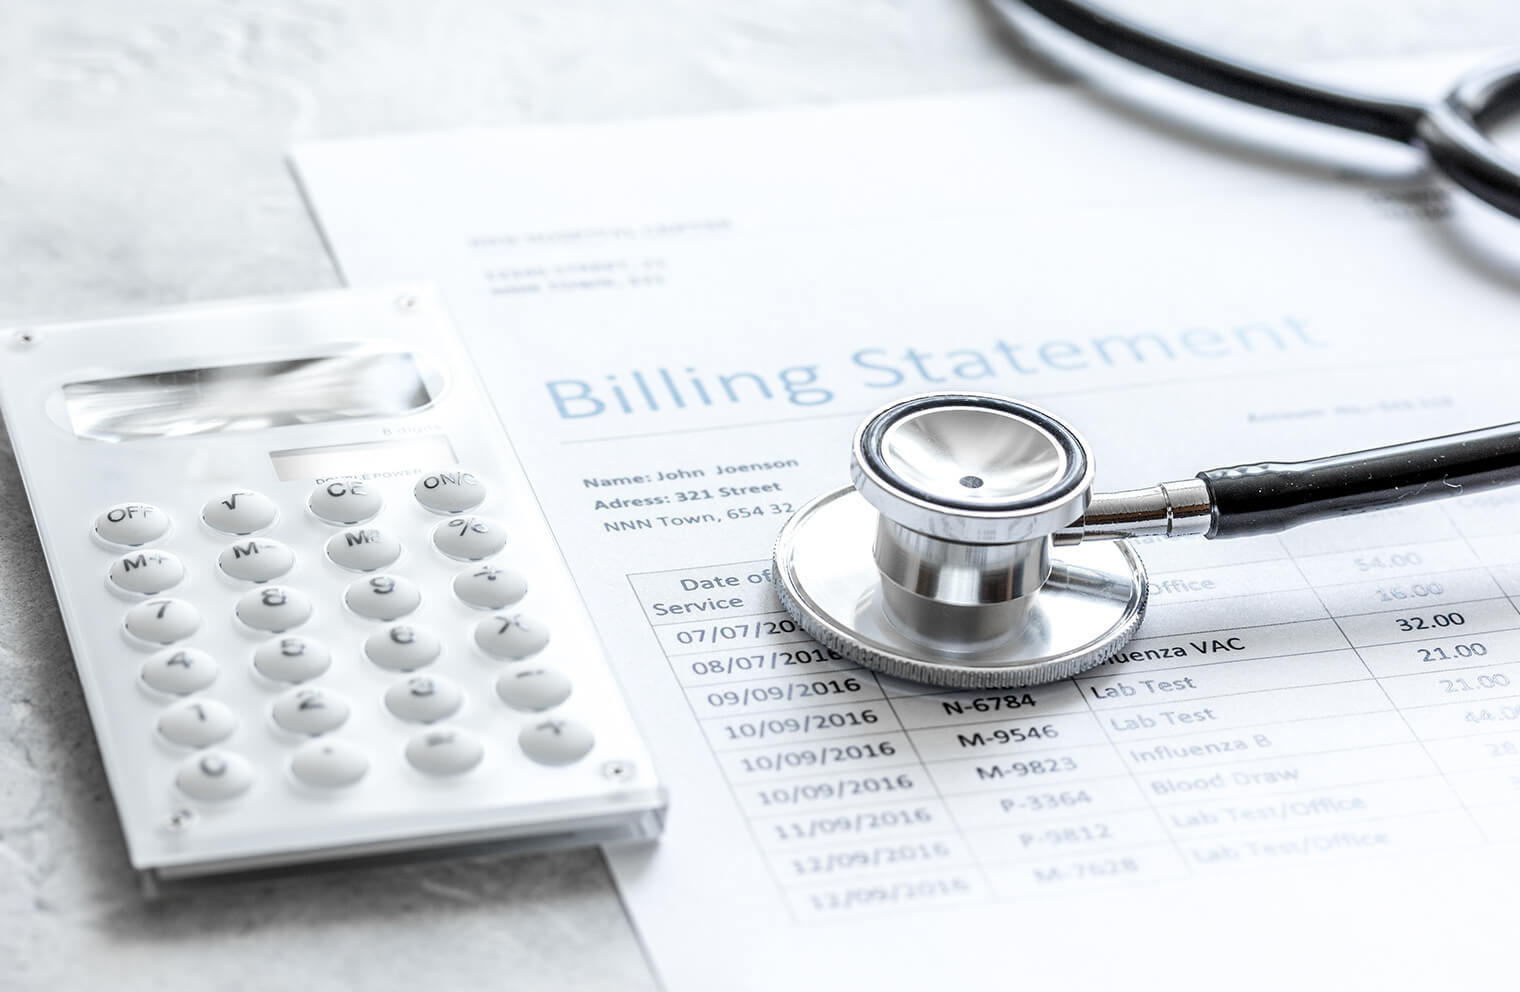 Picture of a calculator and a stethoscope on top of a document titled, "Billing Statement".